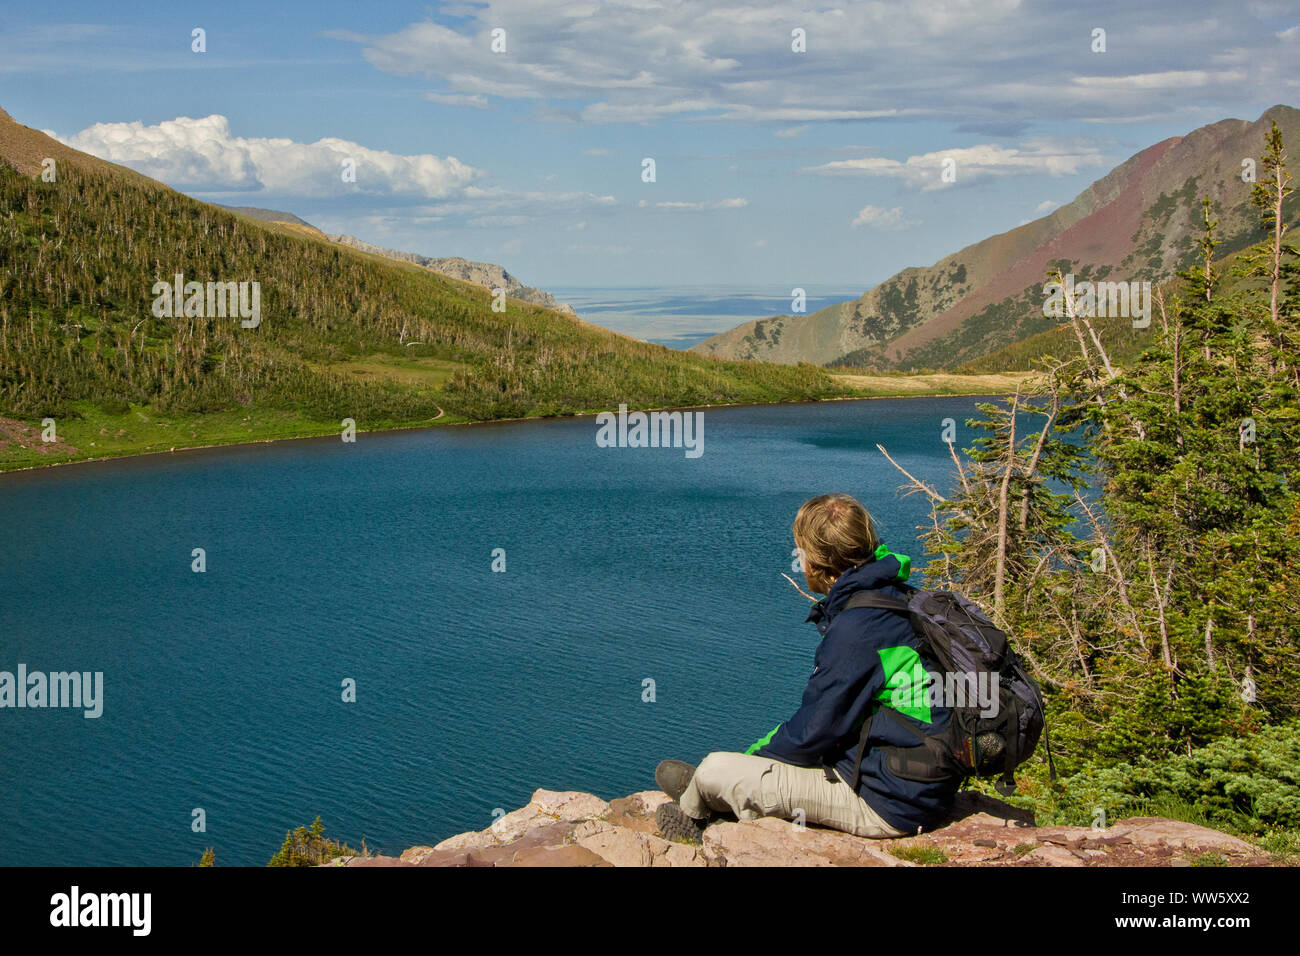 Young man sitting on a rock and looking over a mountain lake in the valley, Rocky Mountains, Alberta, Canada Stock Photo